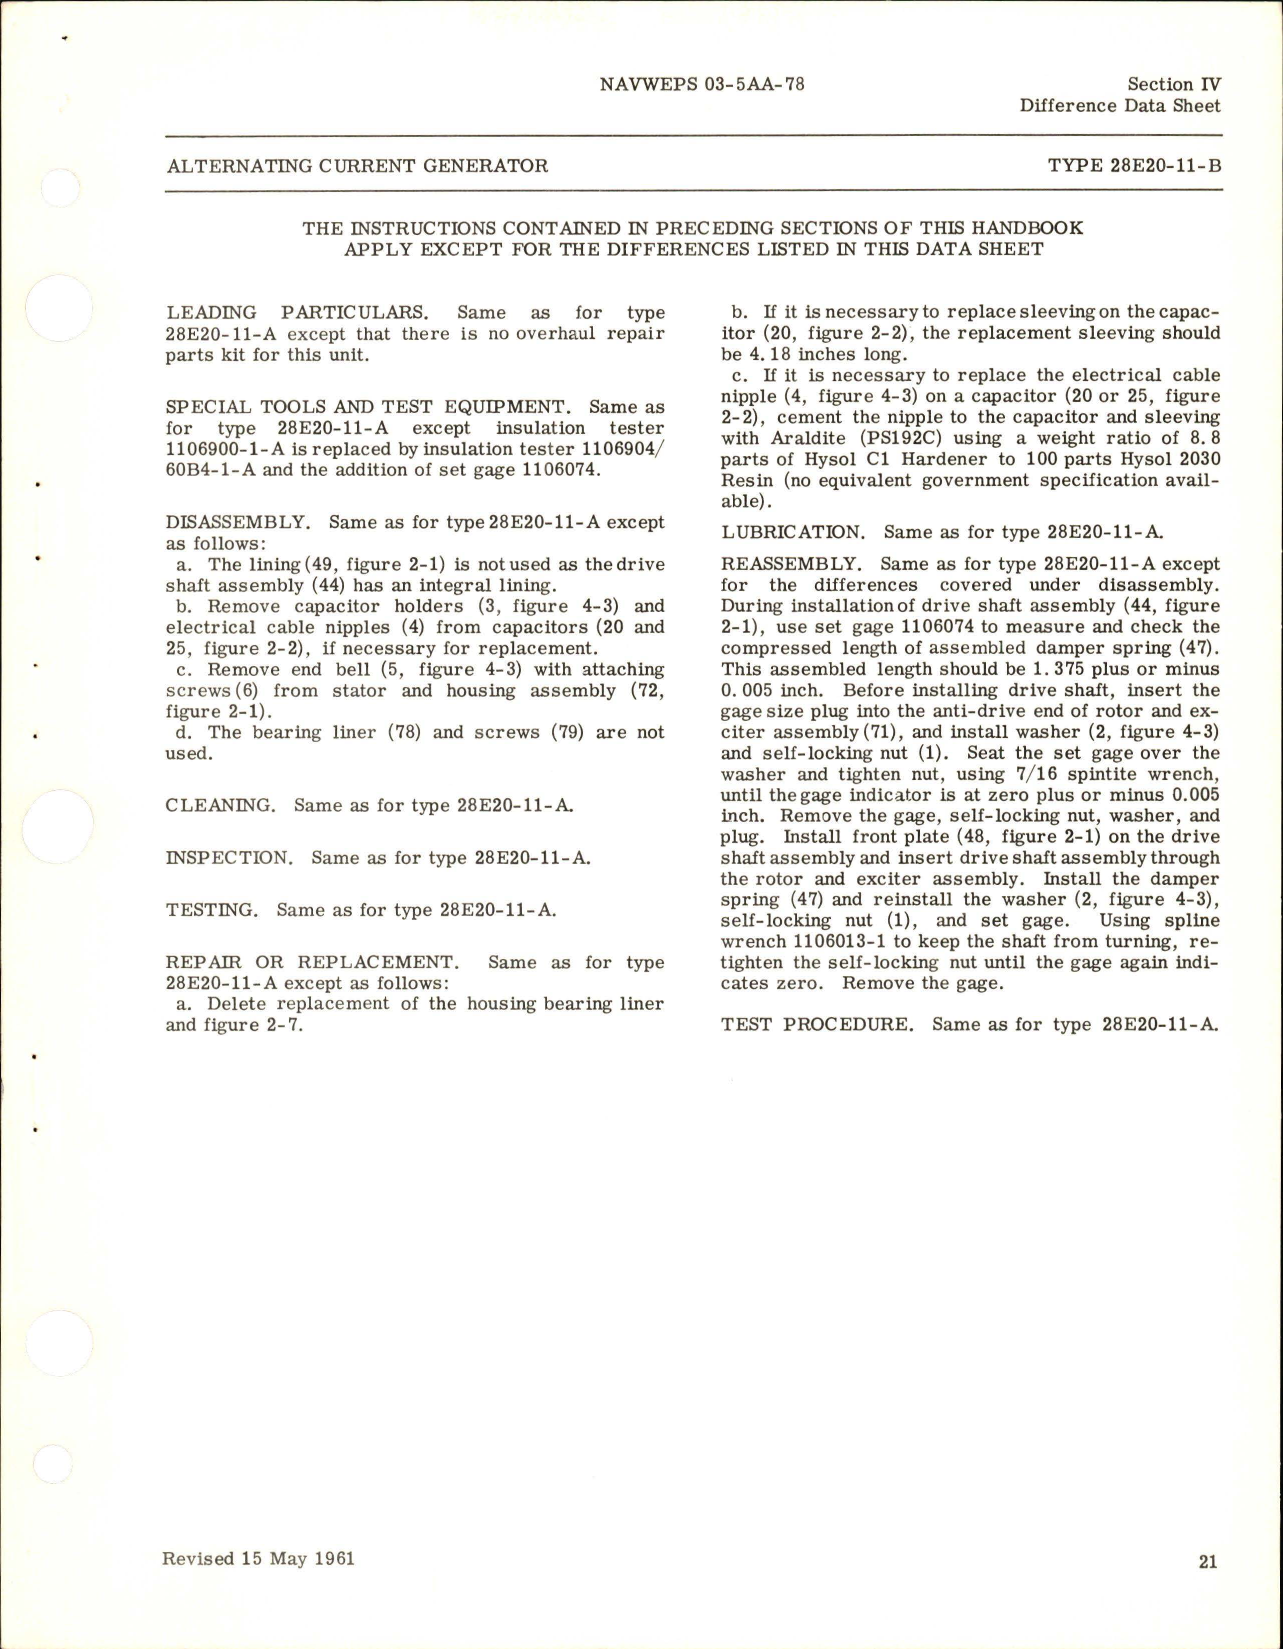 Sample page 5 from AirCorps Library document: Overhaul Instructions for Alternating Current Generator